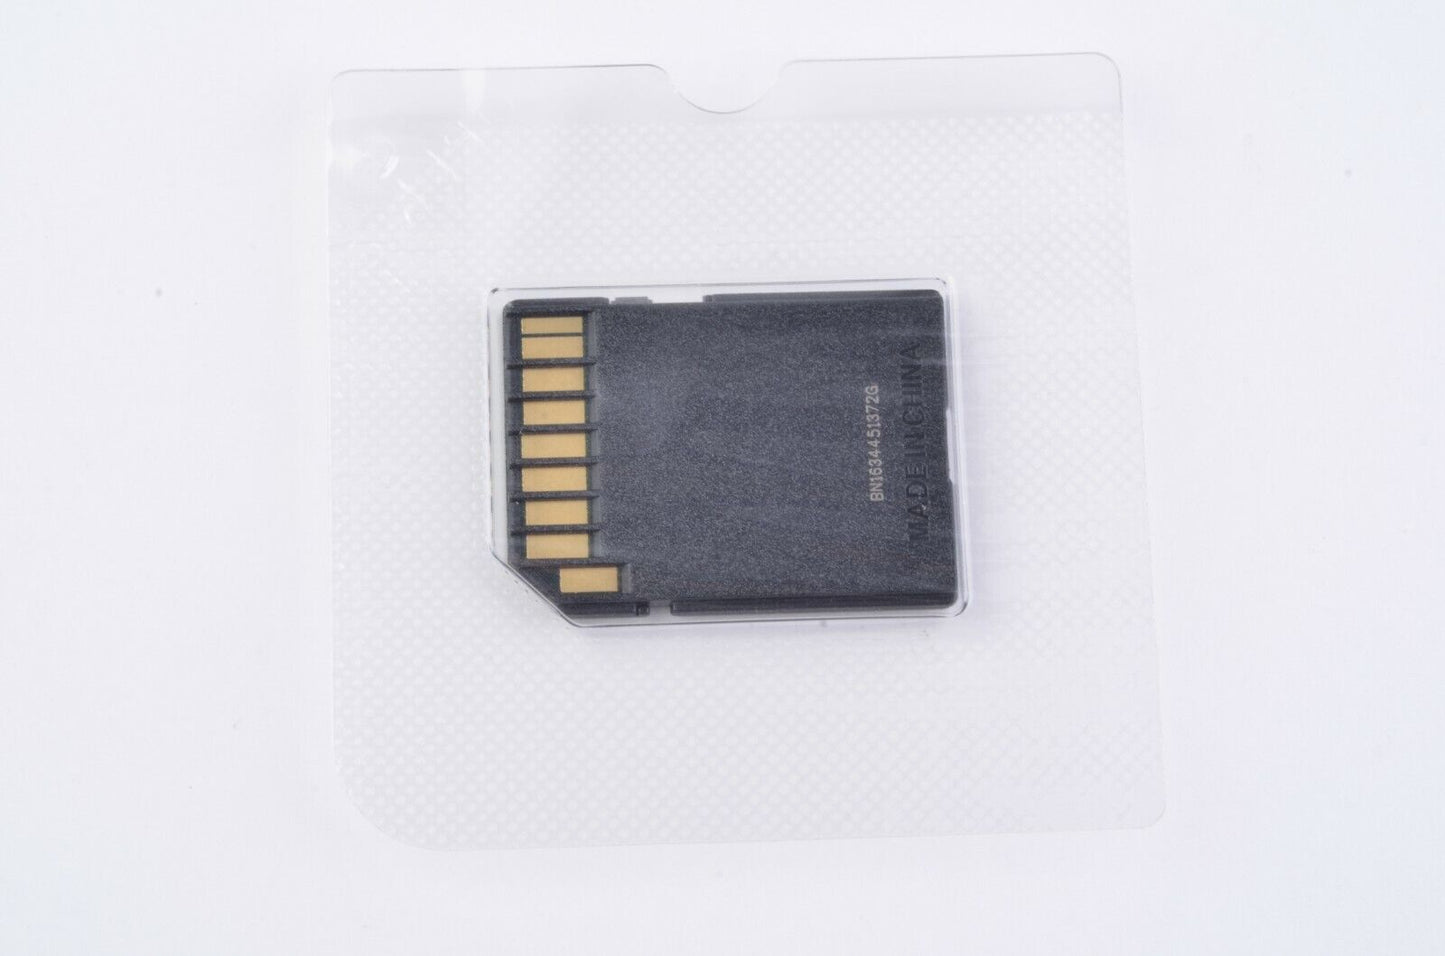 NEW SANDISK ULTRA 64GB 80MB/s SDXC SDHC Class 10 533x SD - NEVER USED